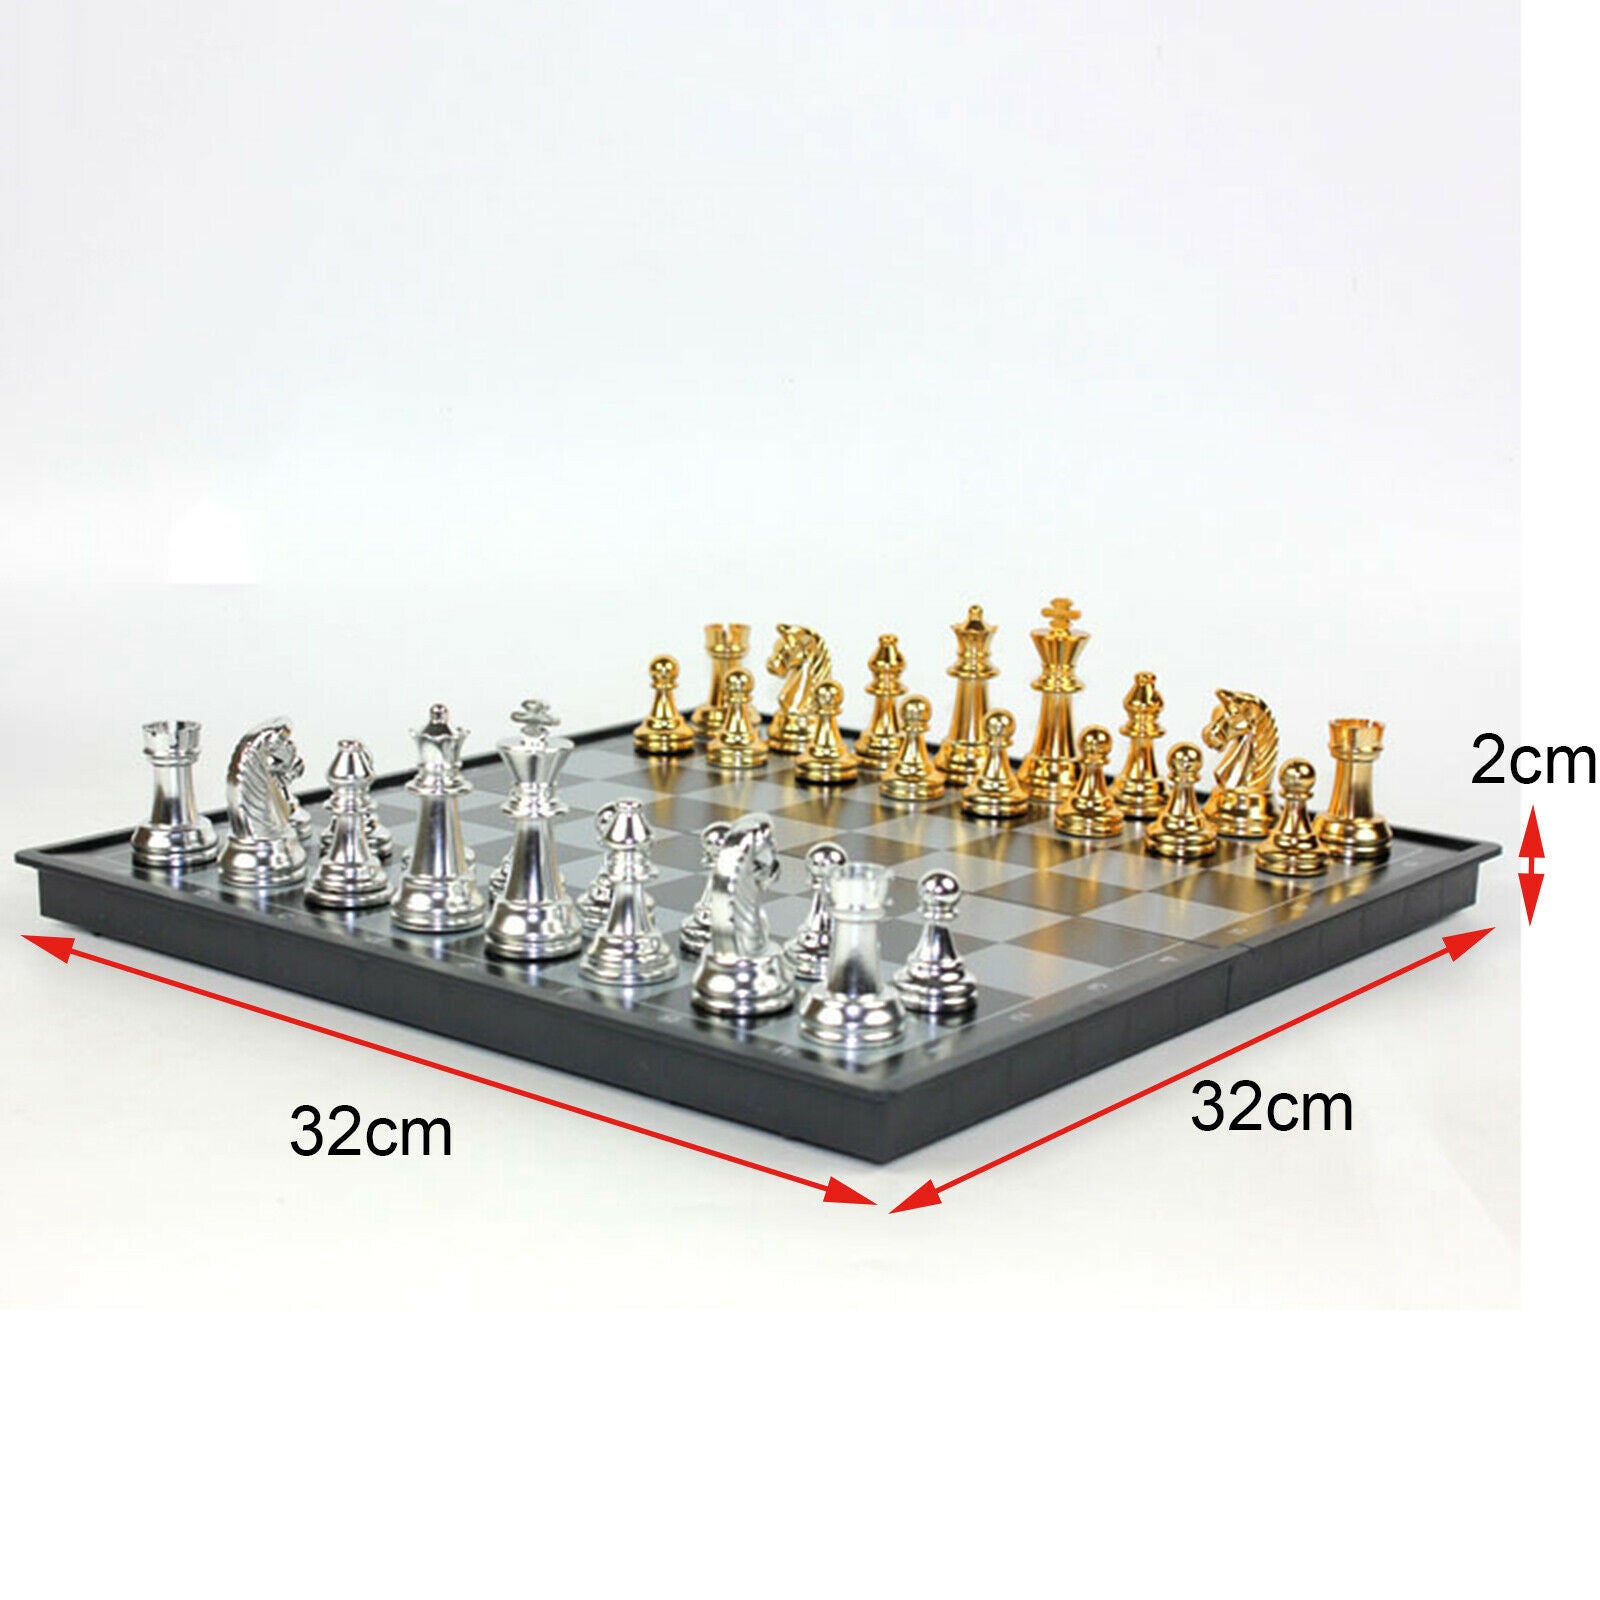 Travel Chess Set with Folding Magnetic Chess Board Metal Chess Pieces 32cm